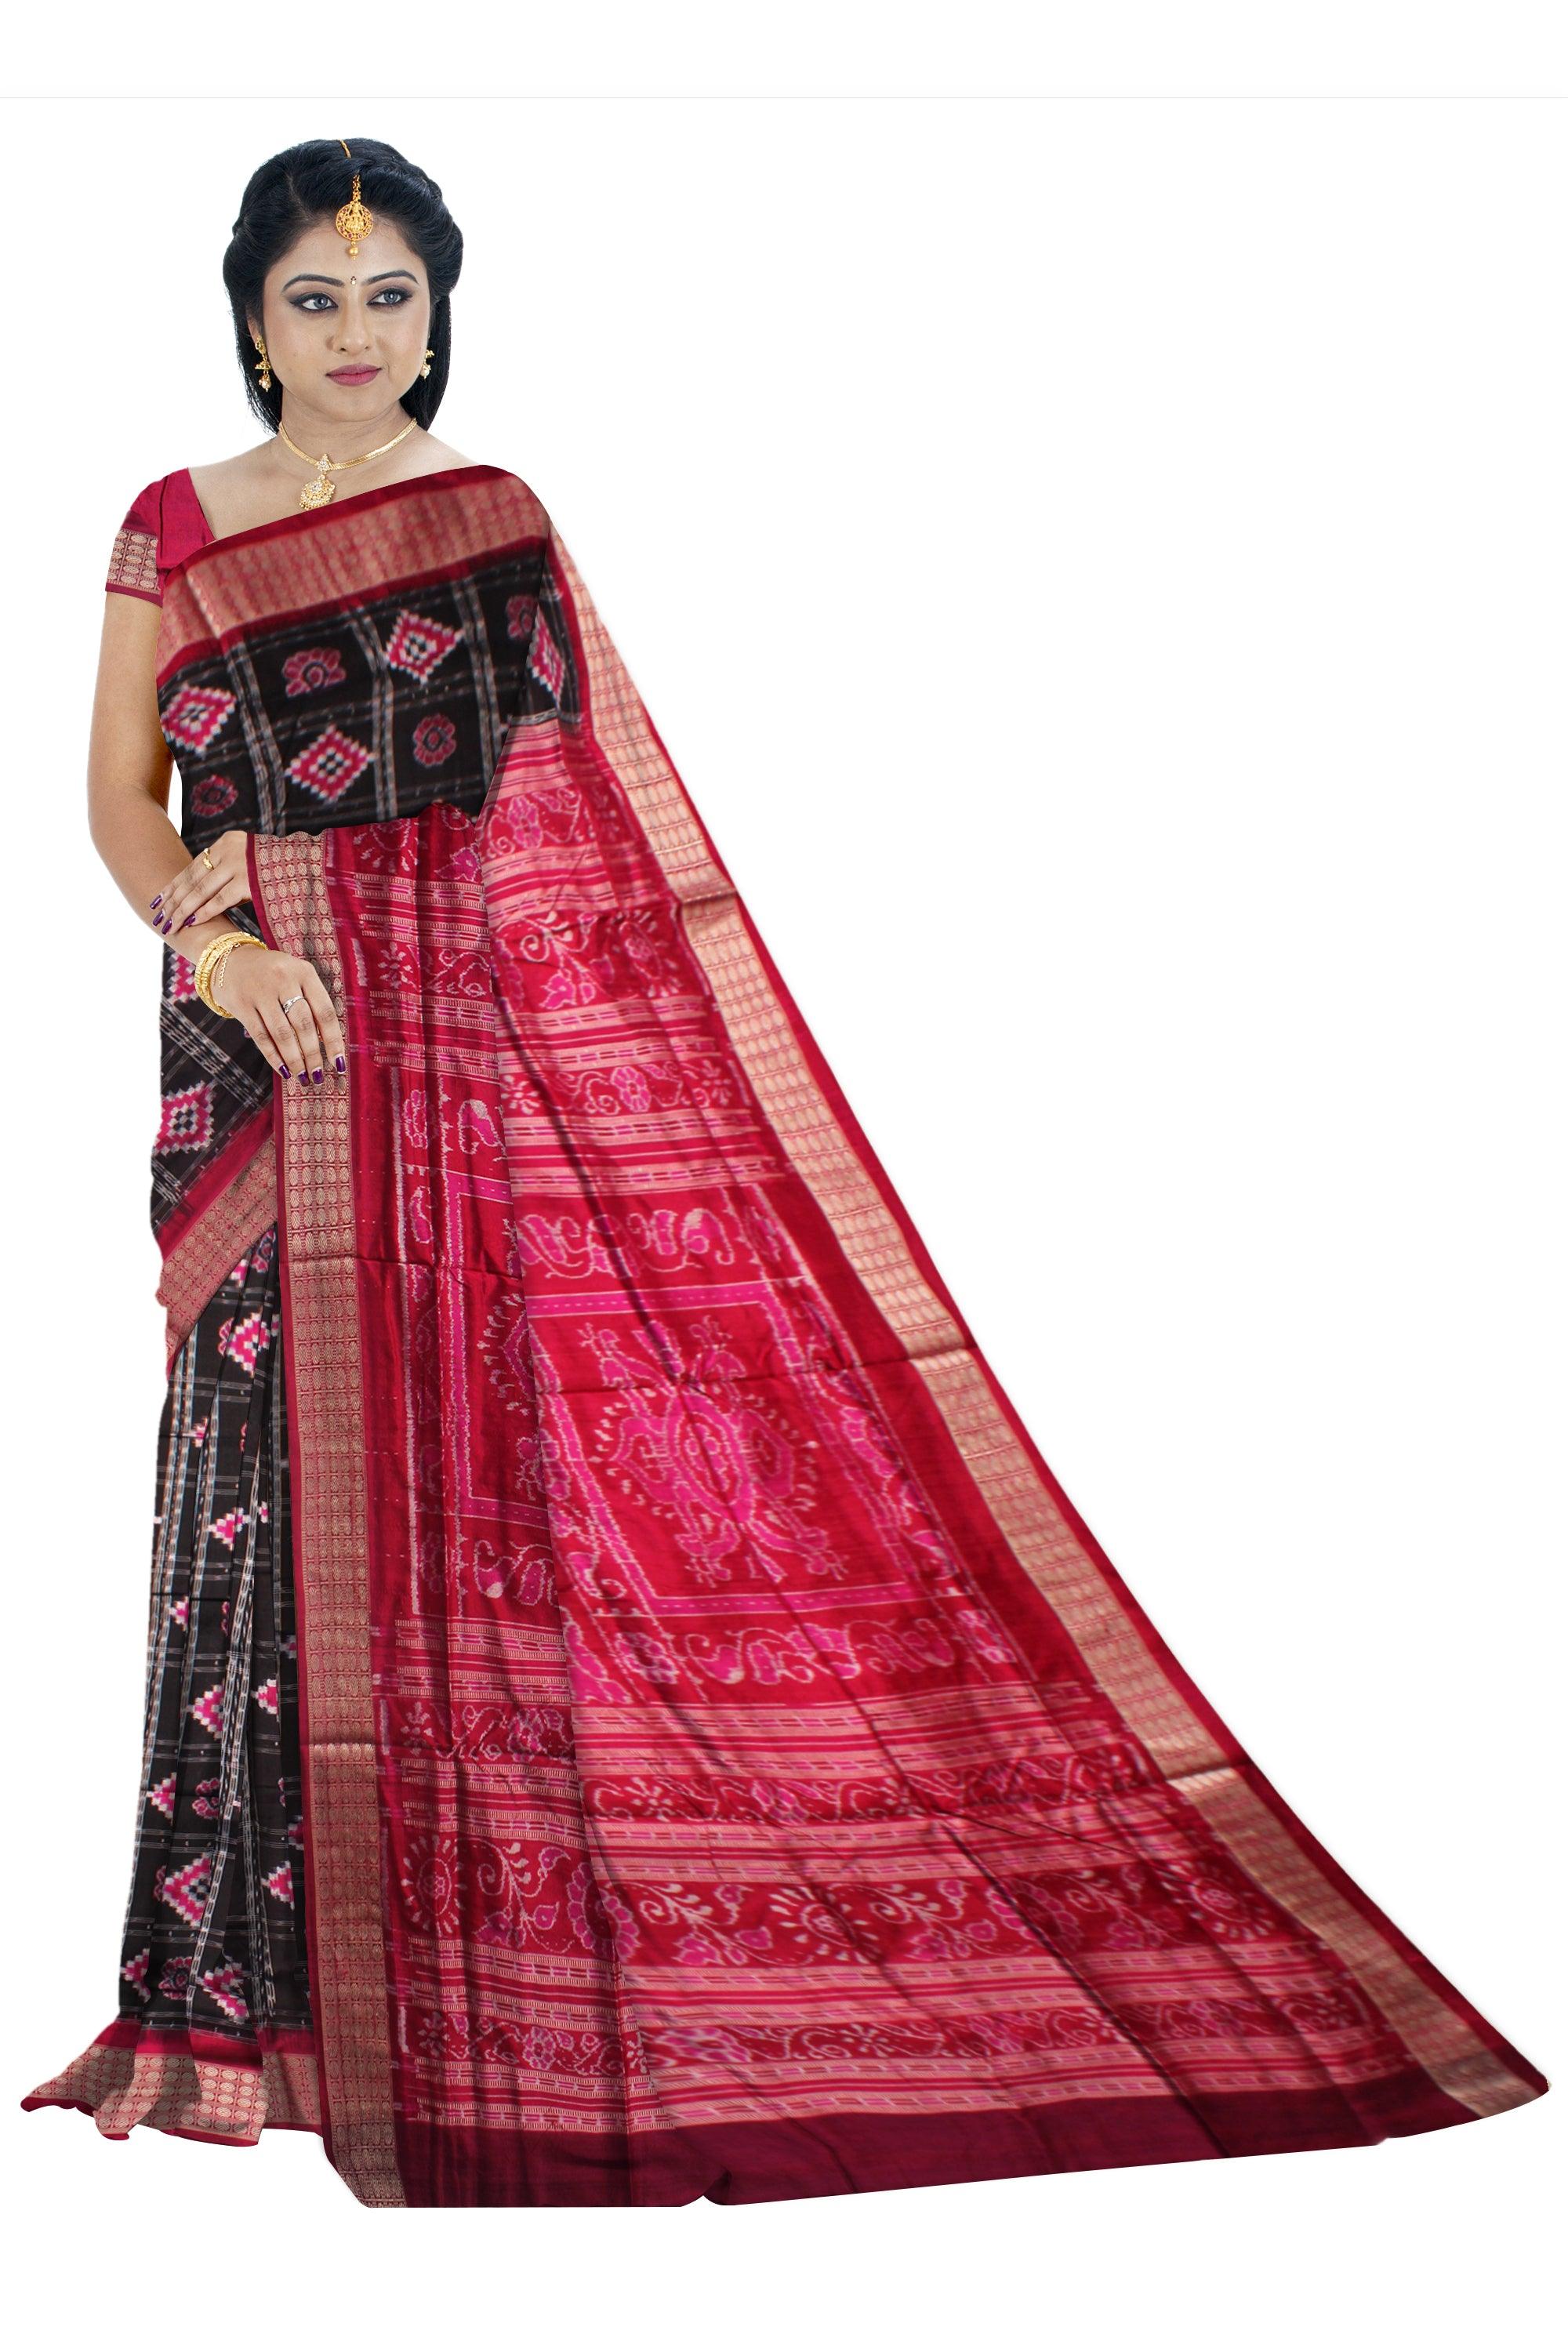 ORIGINAL SILK SAREE IN PASAPALI DESIGN IN BLACK AND PINK COLOR BASE, ATTACHED WITH BLOUSE PIECE. - Koshali Arts & Crafts Enterprise